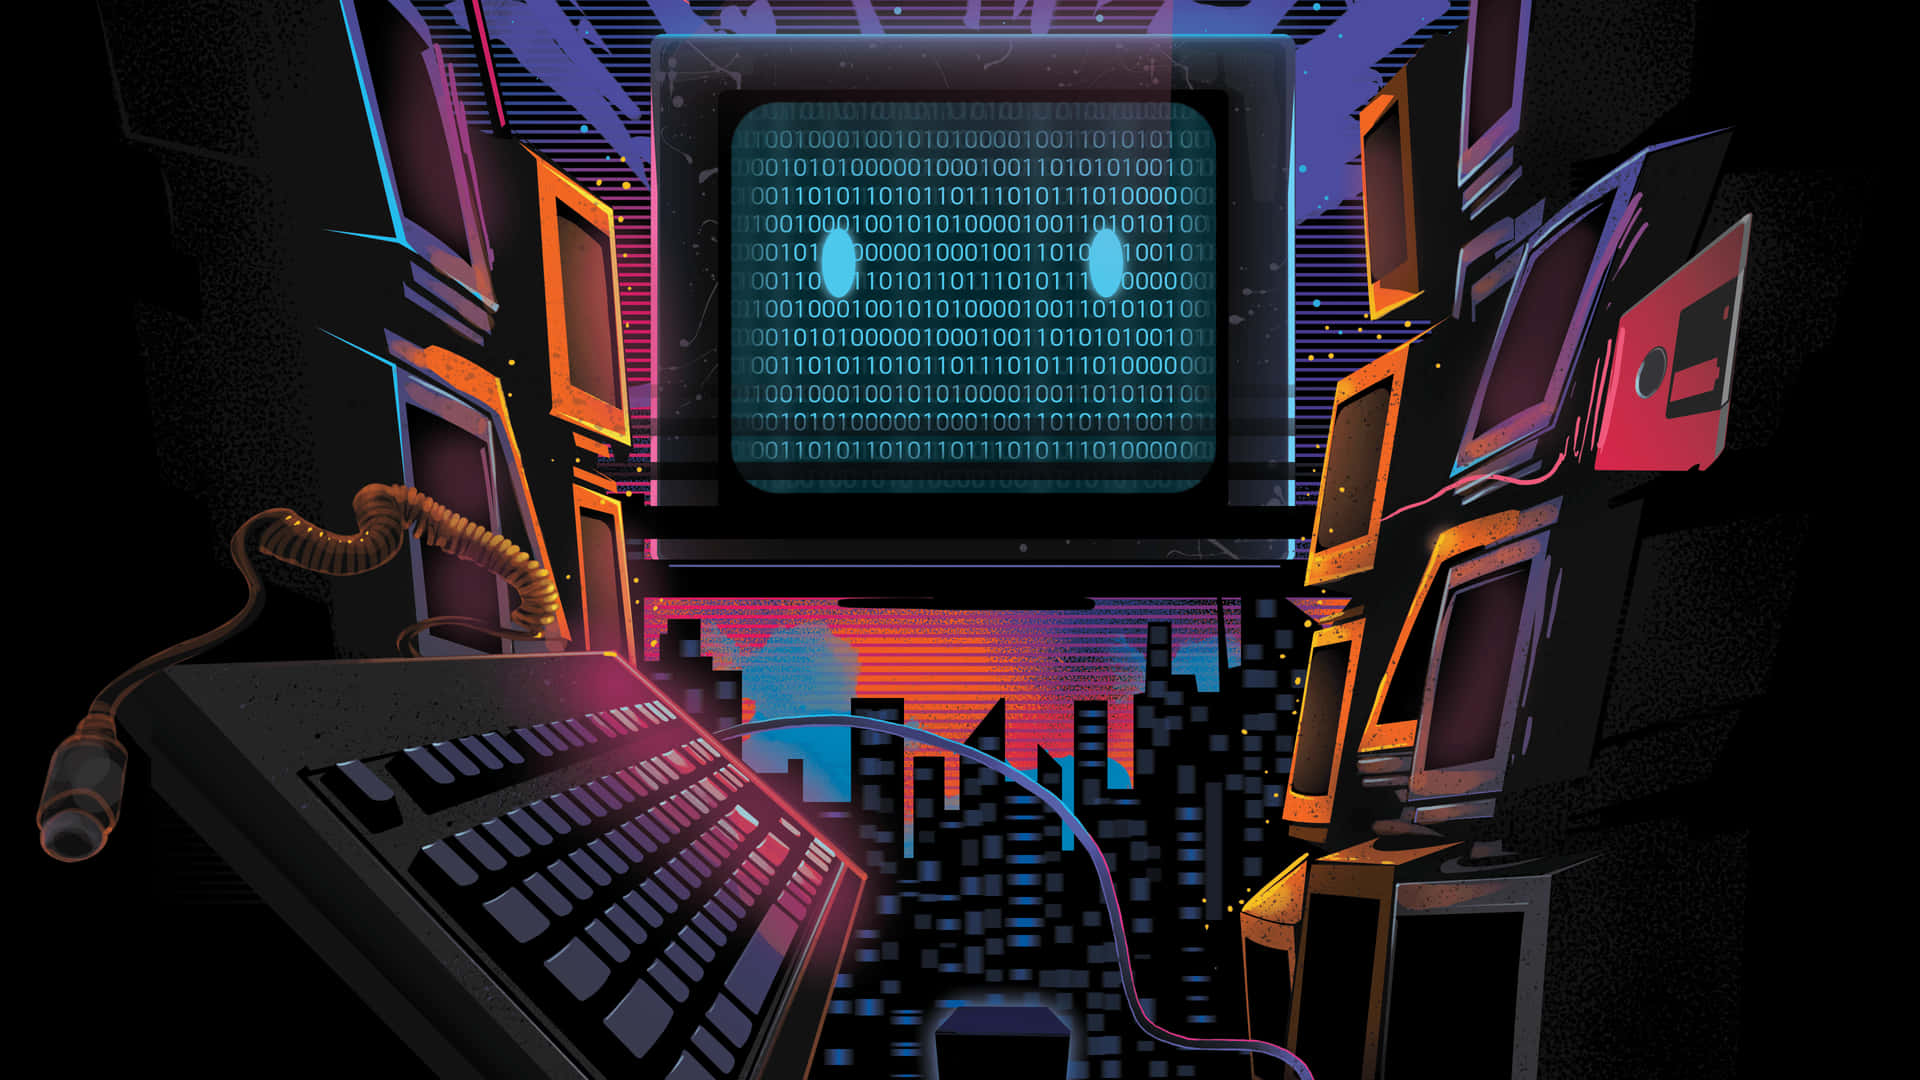 Terminal Codes On The Computer Screens Background